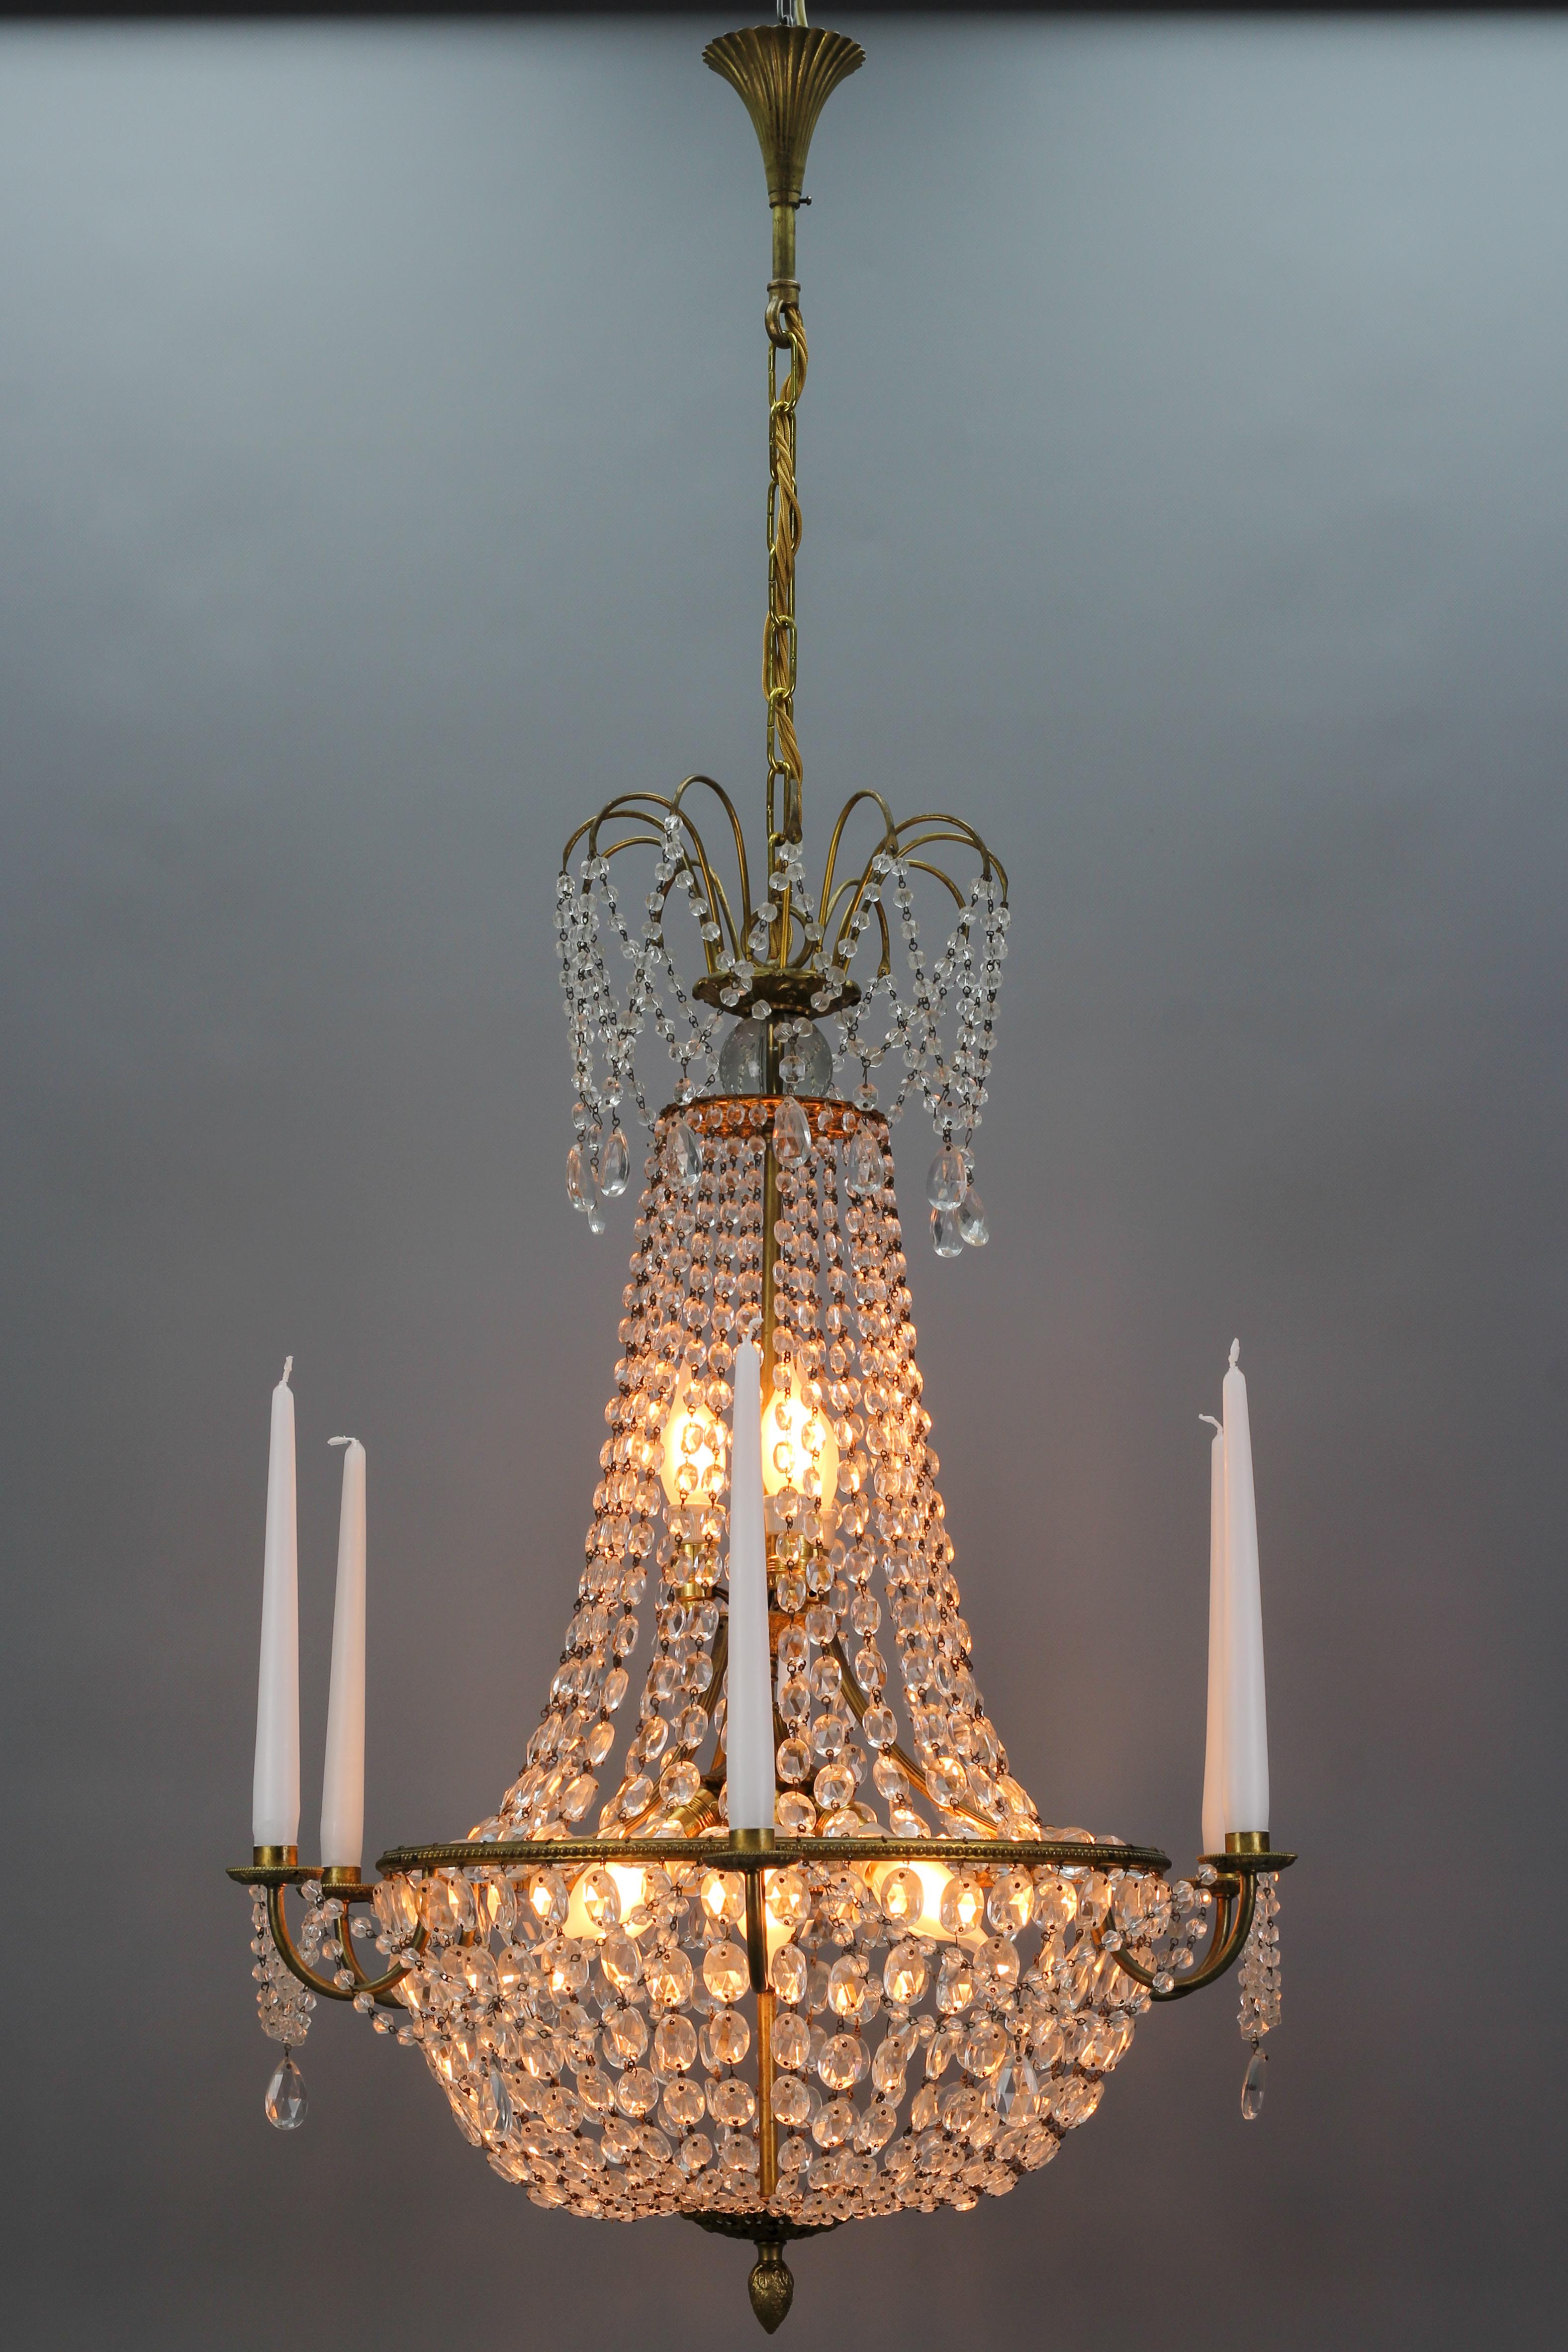 Beautiful, subtle late 19th century Louis XVI style brass and crystal basket chandelier with a fountain corona, having an elegantly draped canopy with cascading bead crystals and almond-shaped prisms. This superb French chandelier features six